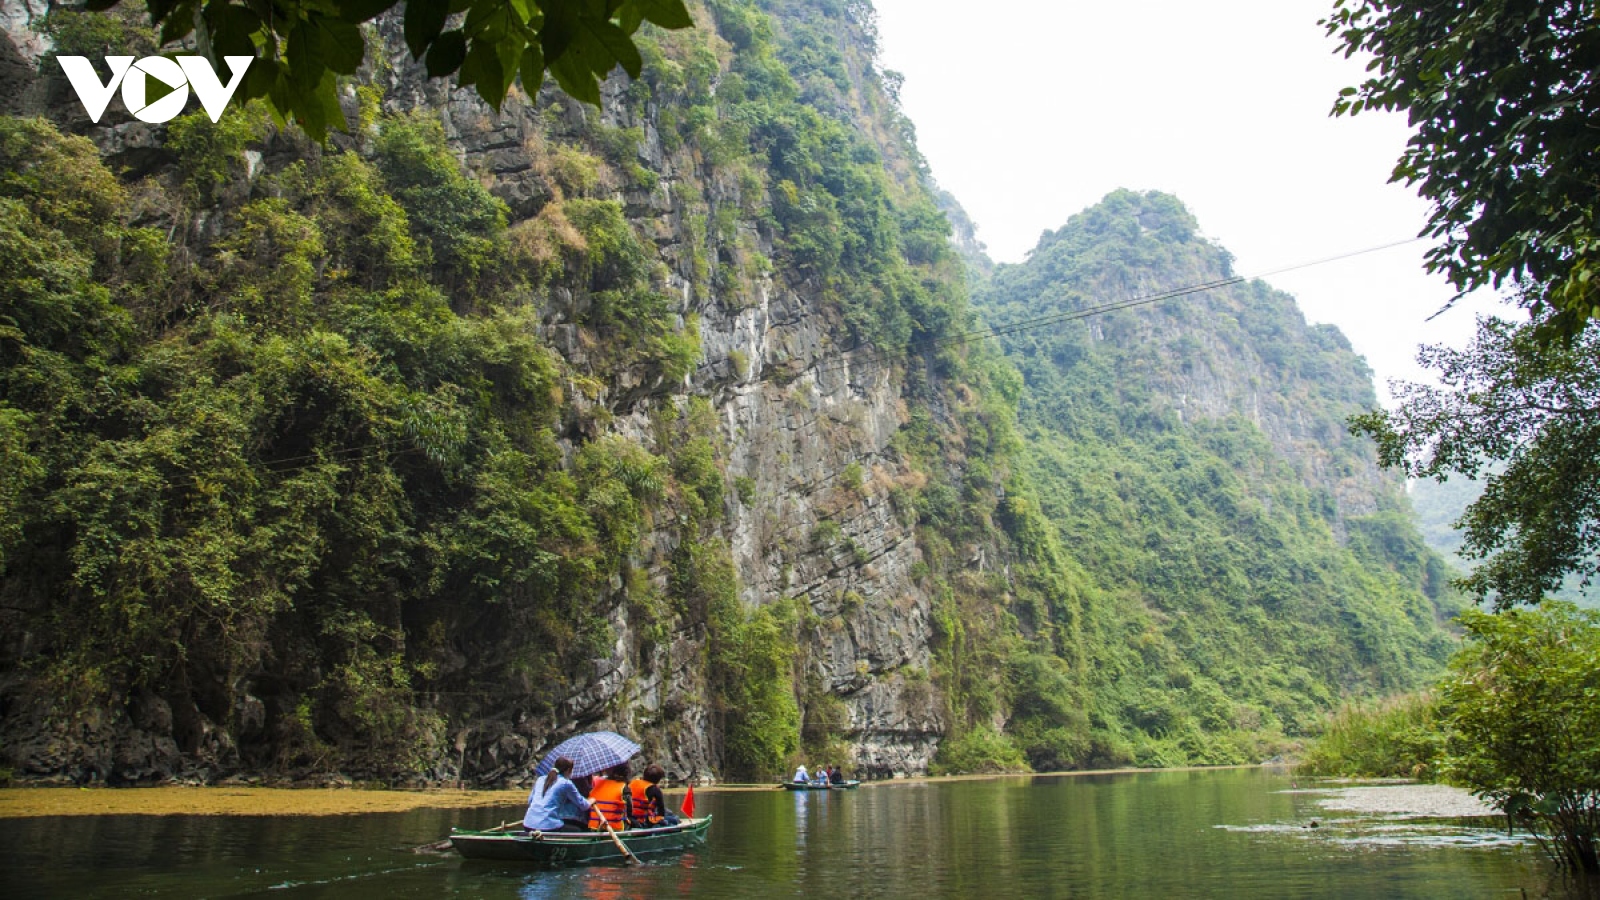 Trang An, Tam Coc among world’s most beautiful movie locations